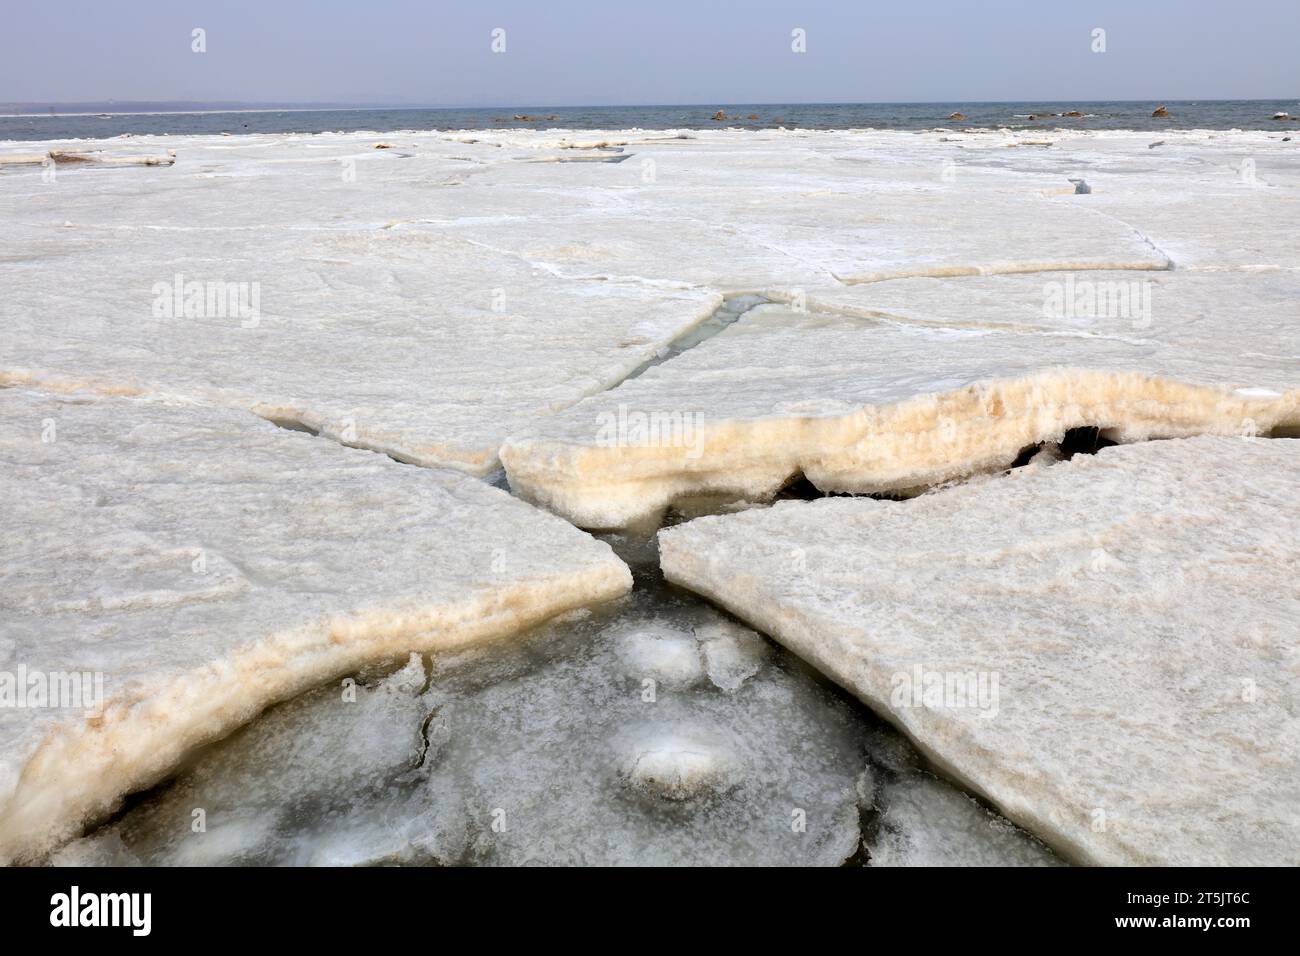 Sea ice in the natural environment Stock Photo